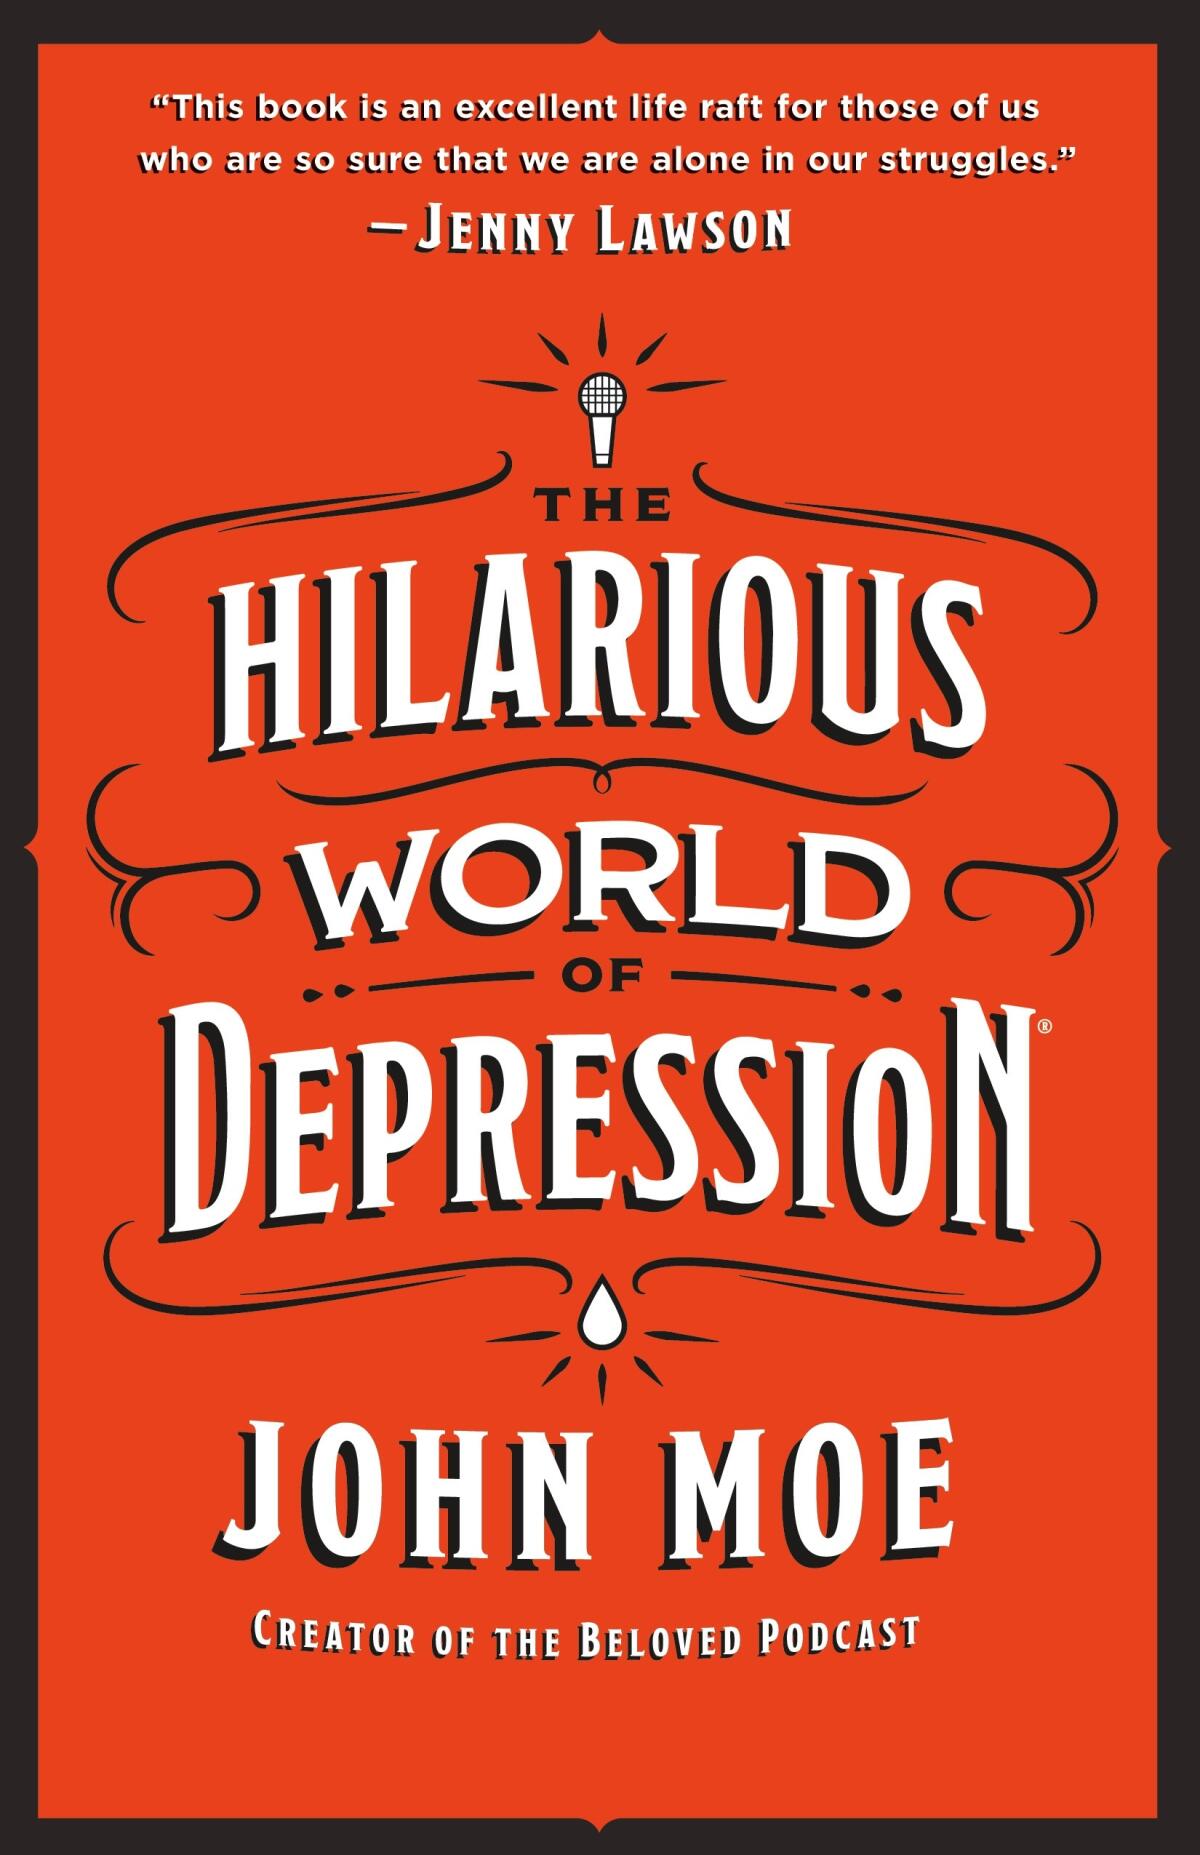 A book jacket for "The Hilarious World of Depression," by John Moe. Credit: St. Martin's Press